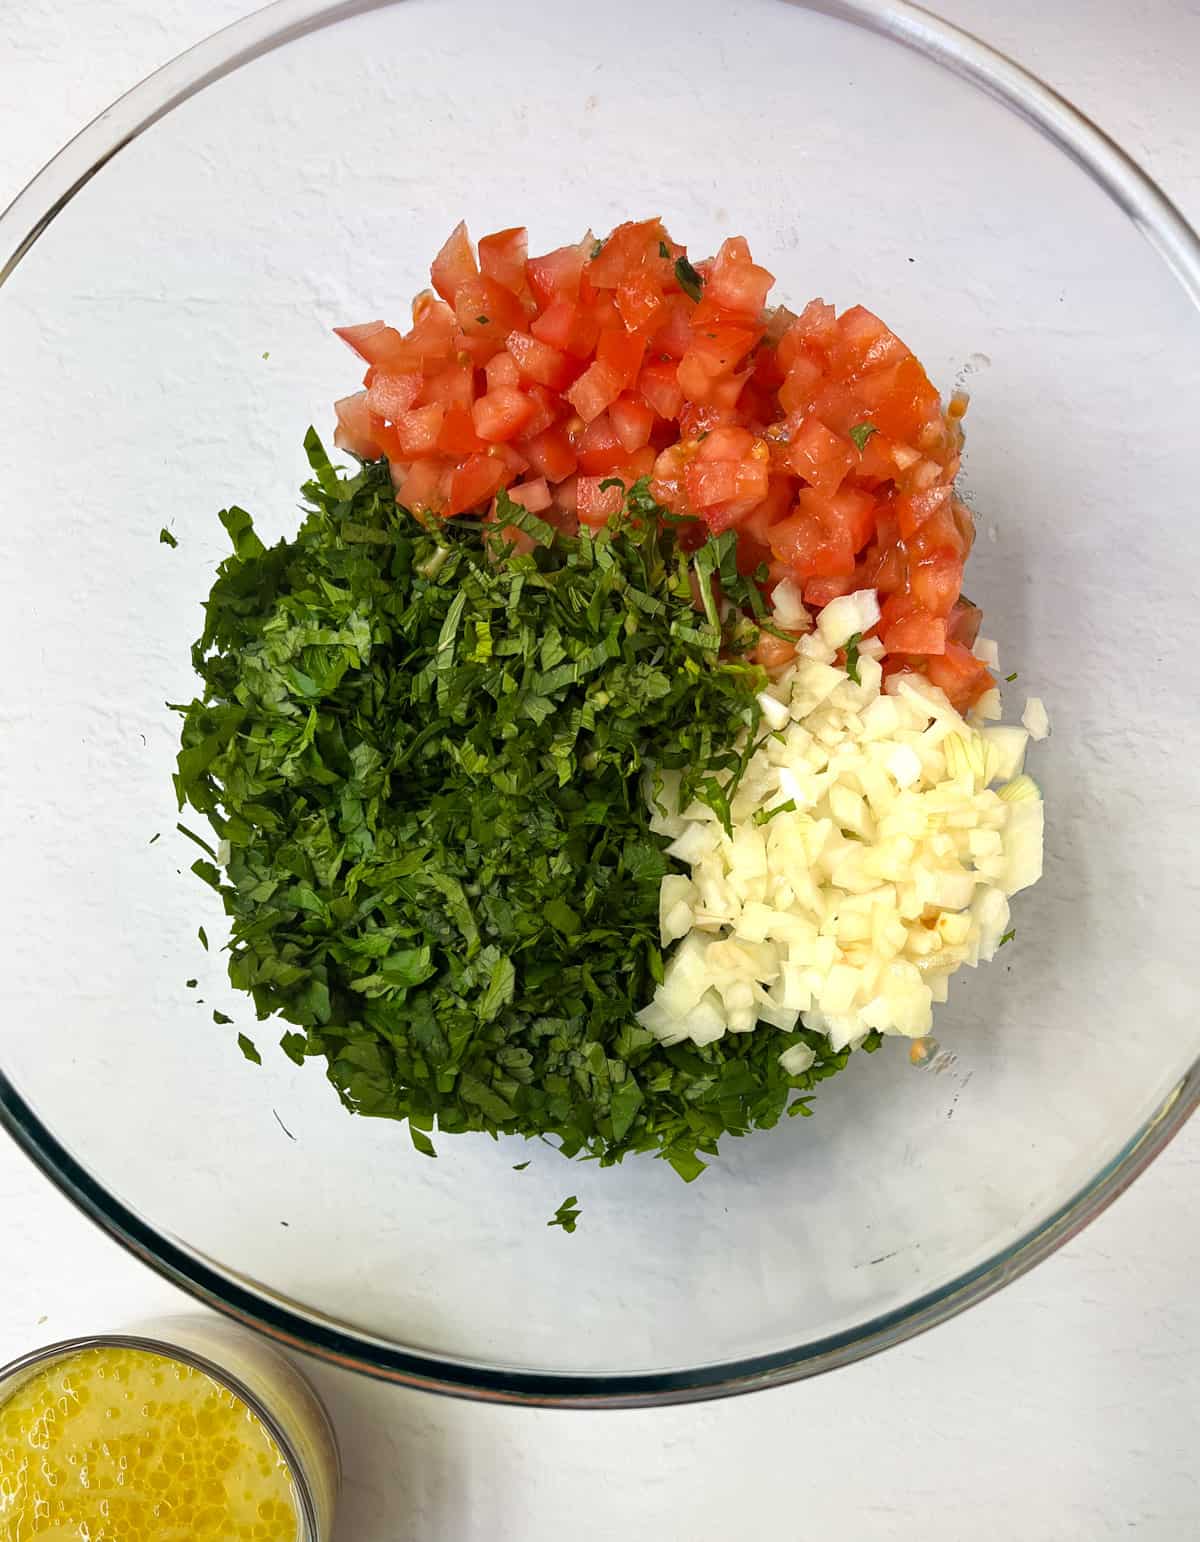 onion, tomato finely diced and finely sliced mint and parsley in a glass bowl